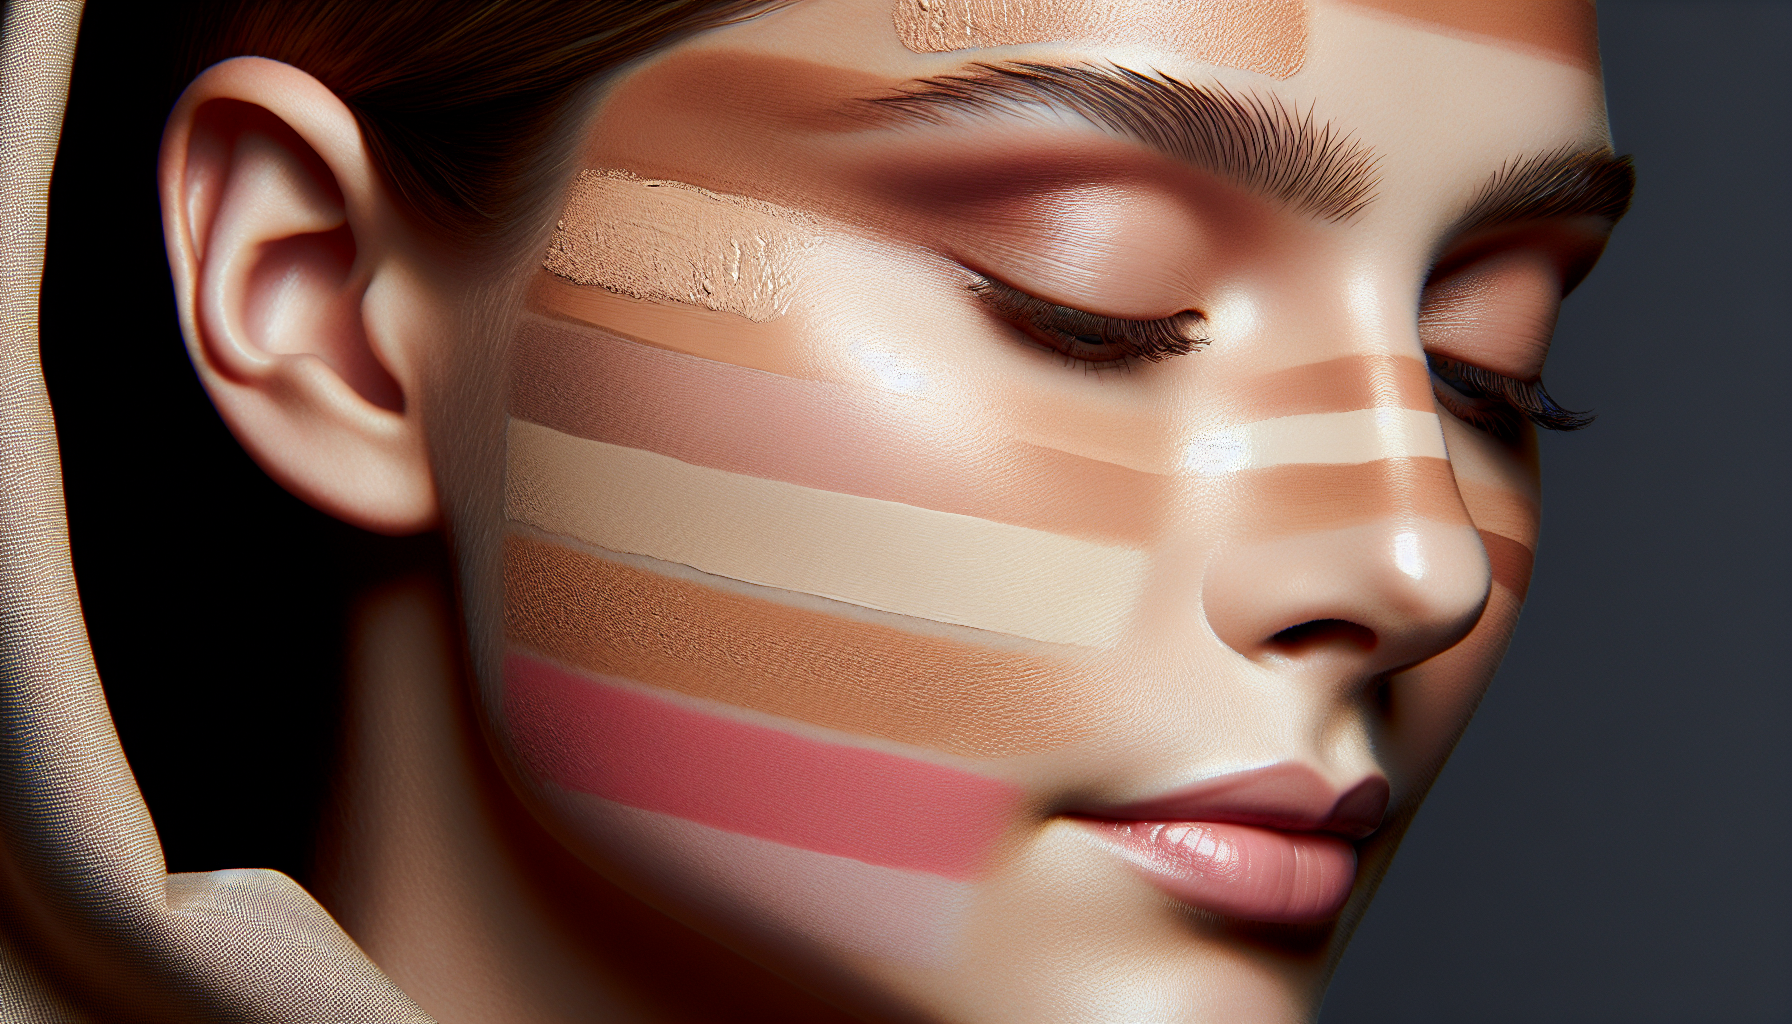 Multi-shade approach for concealer